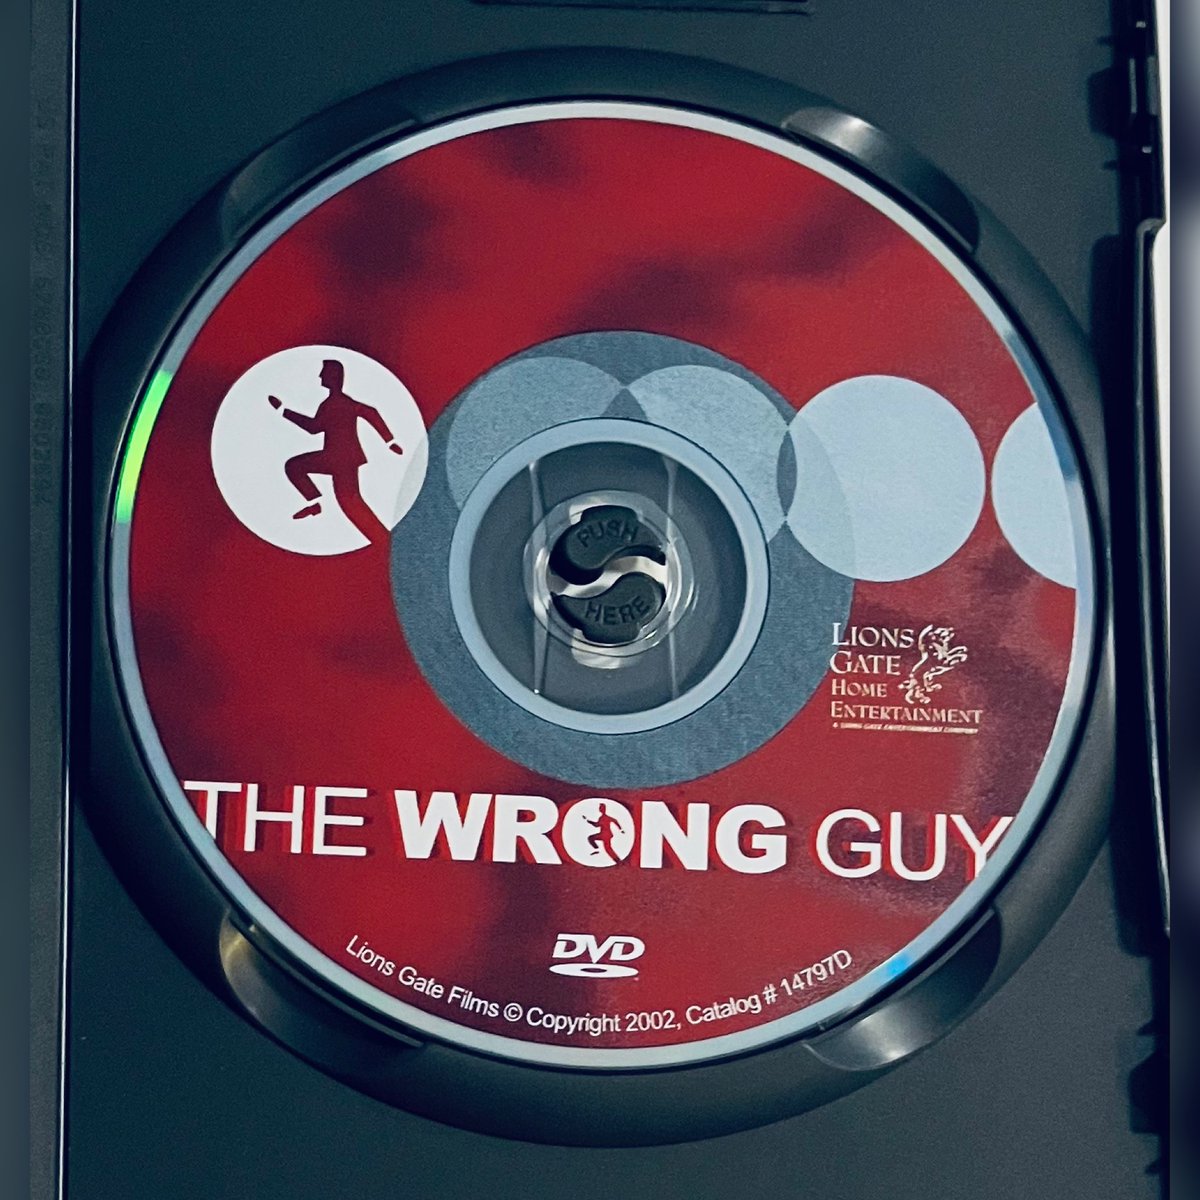 #NewArrival! The Wrong Guy (DVD 1997) Dave Foley, Jennifer Tilly, Comedy ULTRA RARE OOP 

rareflicksplus.com/all-products/o…

#TheWrongGuy #DVD #DVDs #90s #90smovies #DaveFoley, #JenniferTilly #RAREDVD #RareDVDs #PhysicalMedia #OOP #Comedy #ComedyMovie #movies #funny